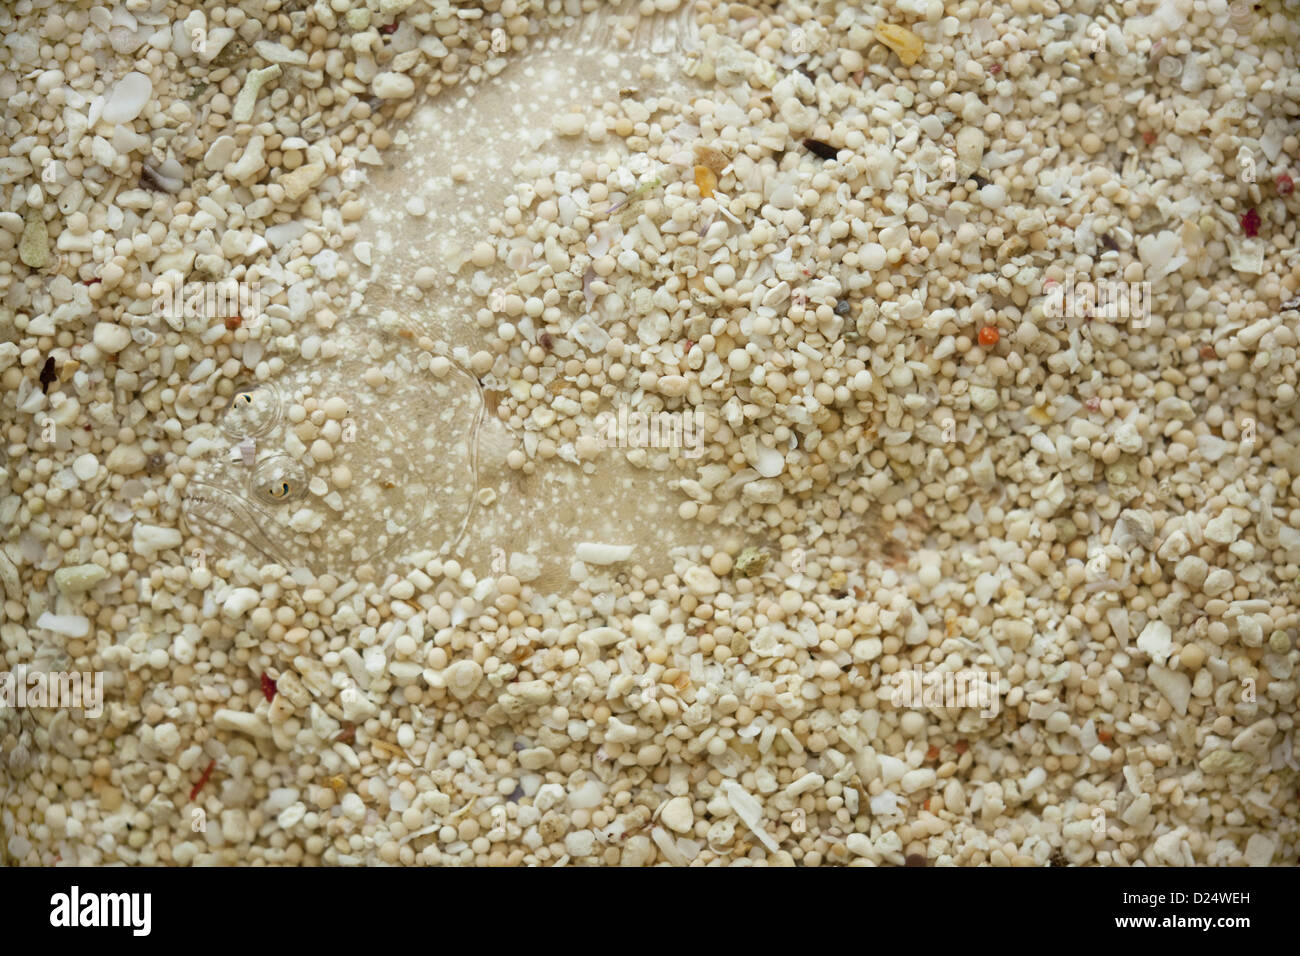 Turbot (Scophthalmus maximus) adult, buried and camouflaged on gravel, The Wash, Lincolnshire, England, March Stock Photo